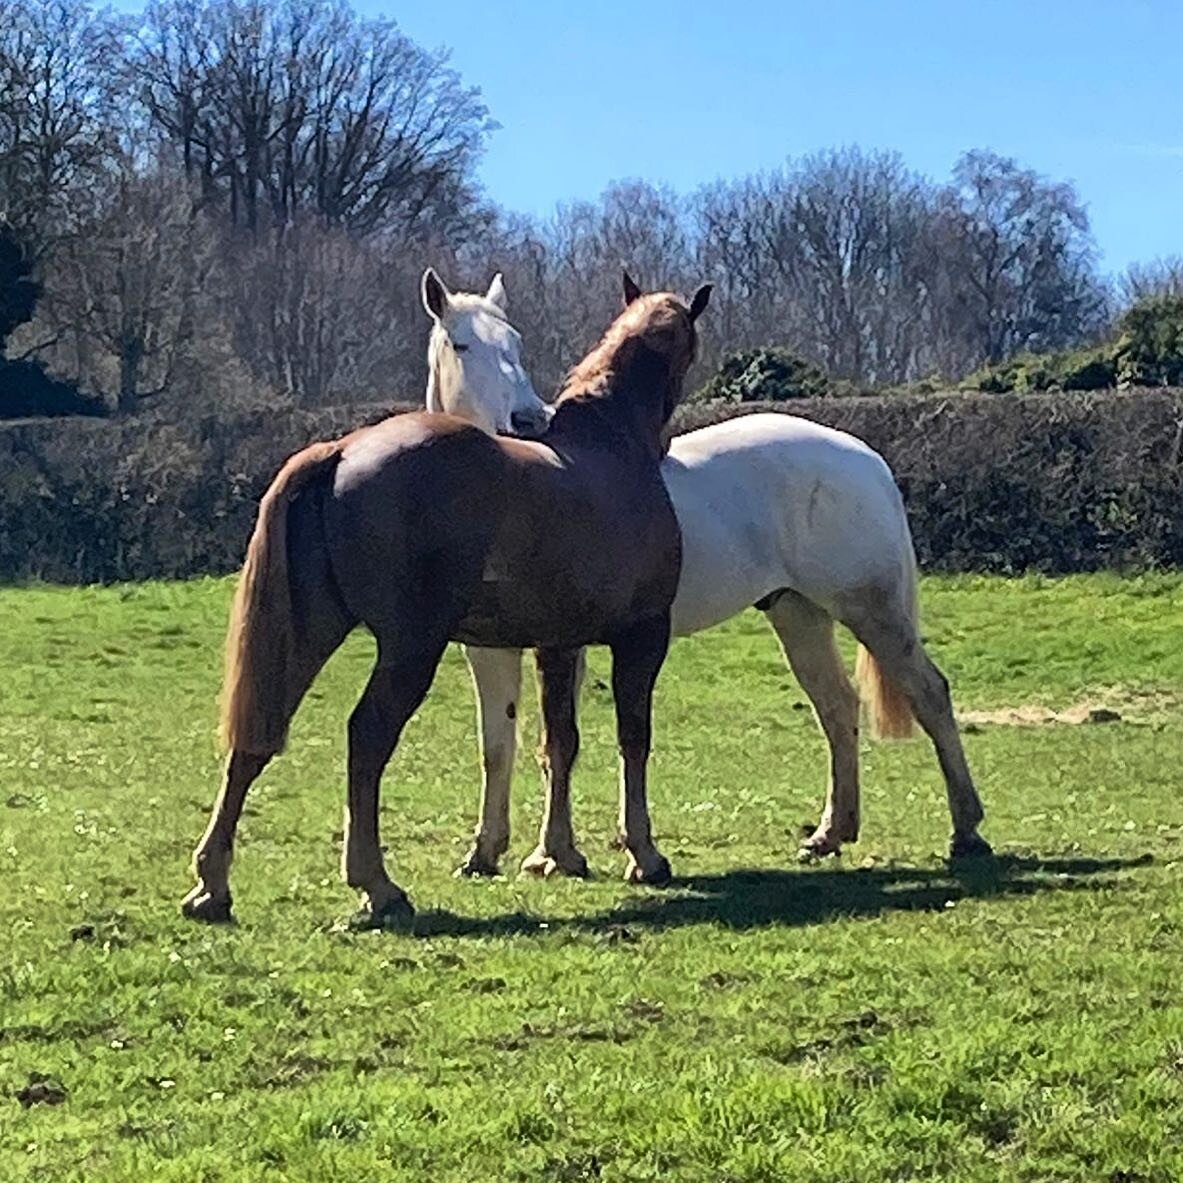 Hunt horses enjoying the &lsquo;spring scratch&rsquo; - could watch them do this for hours. #timewasters #spring #horsesofinstagram #horsesoffacebook #huntinglife #sunshine #atlast